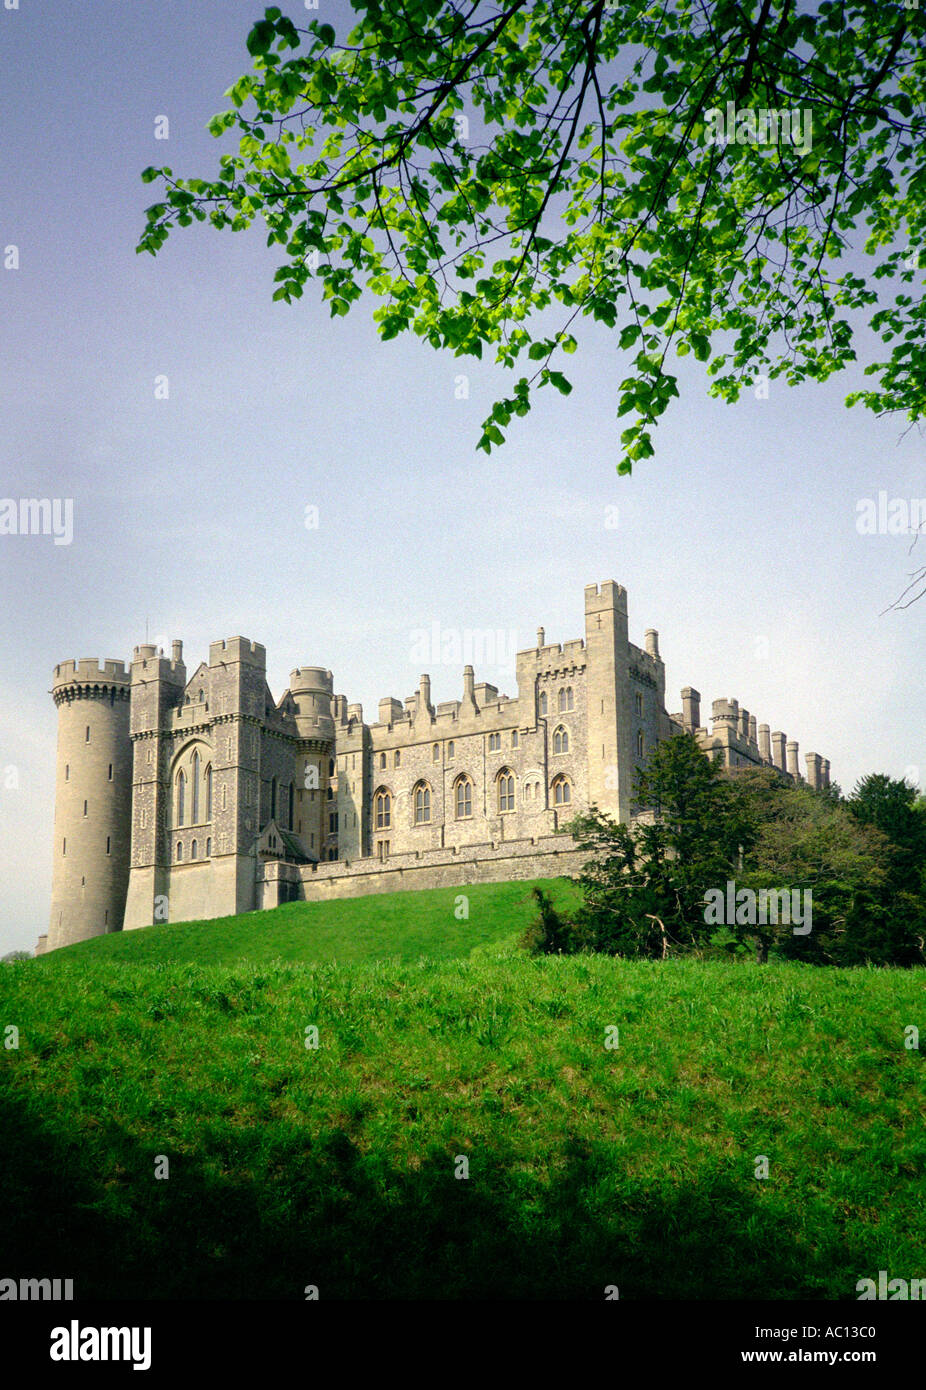 Home Of The Duke Of Norfolk High Resolution Stock Photography and Images -  Alamy